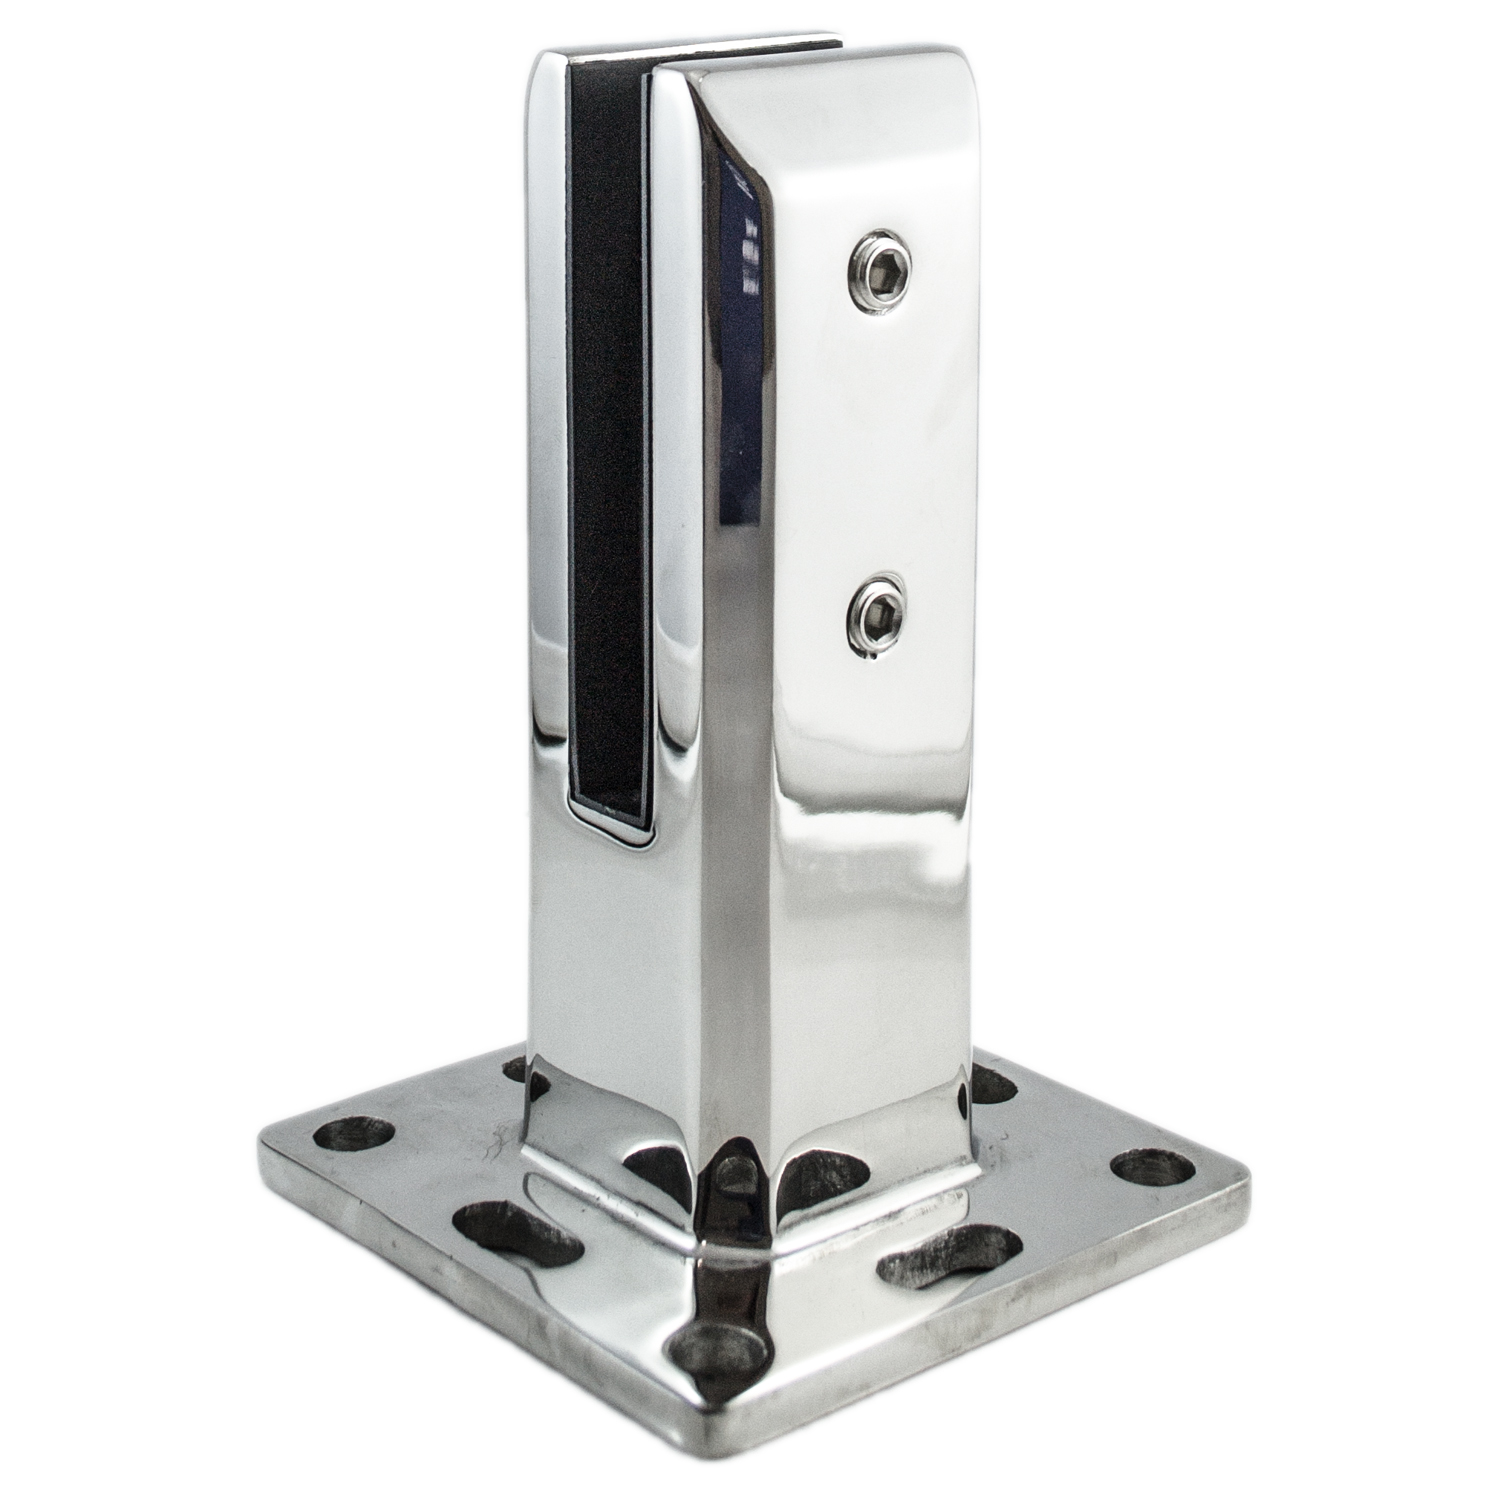 Encore Square Base Spigot Duplex 2205 Stainless Steel Fully Adjustable 50mm Mini Post Spigot with Base (Pool & Balustrade Compliant) -Polished Finish